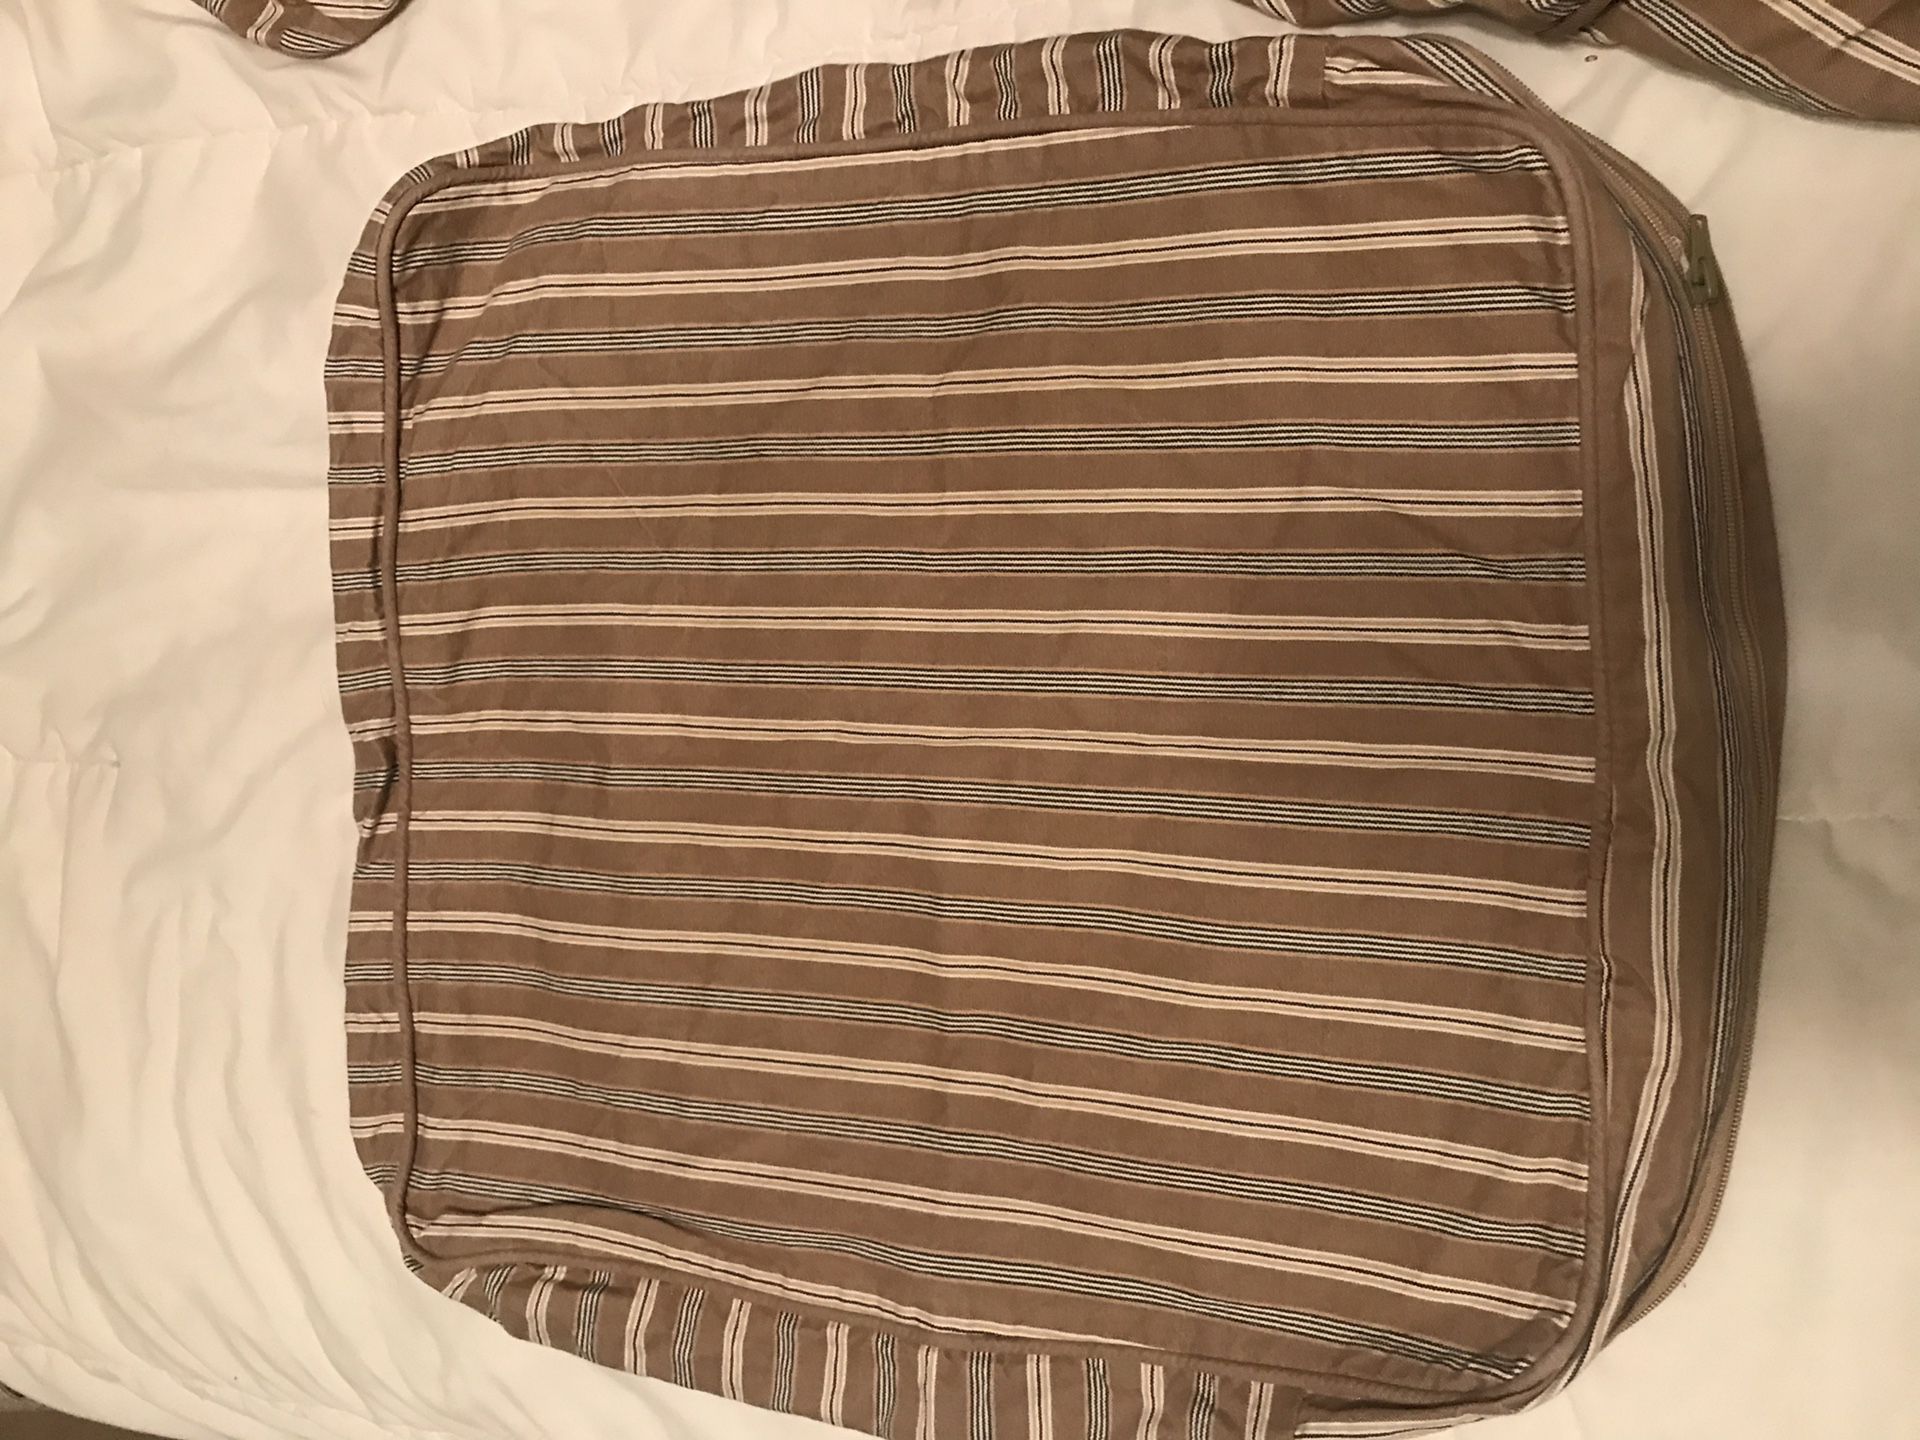 Ikea Jennylund Chair Cover - Brown striped